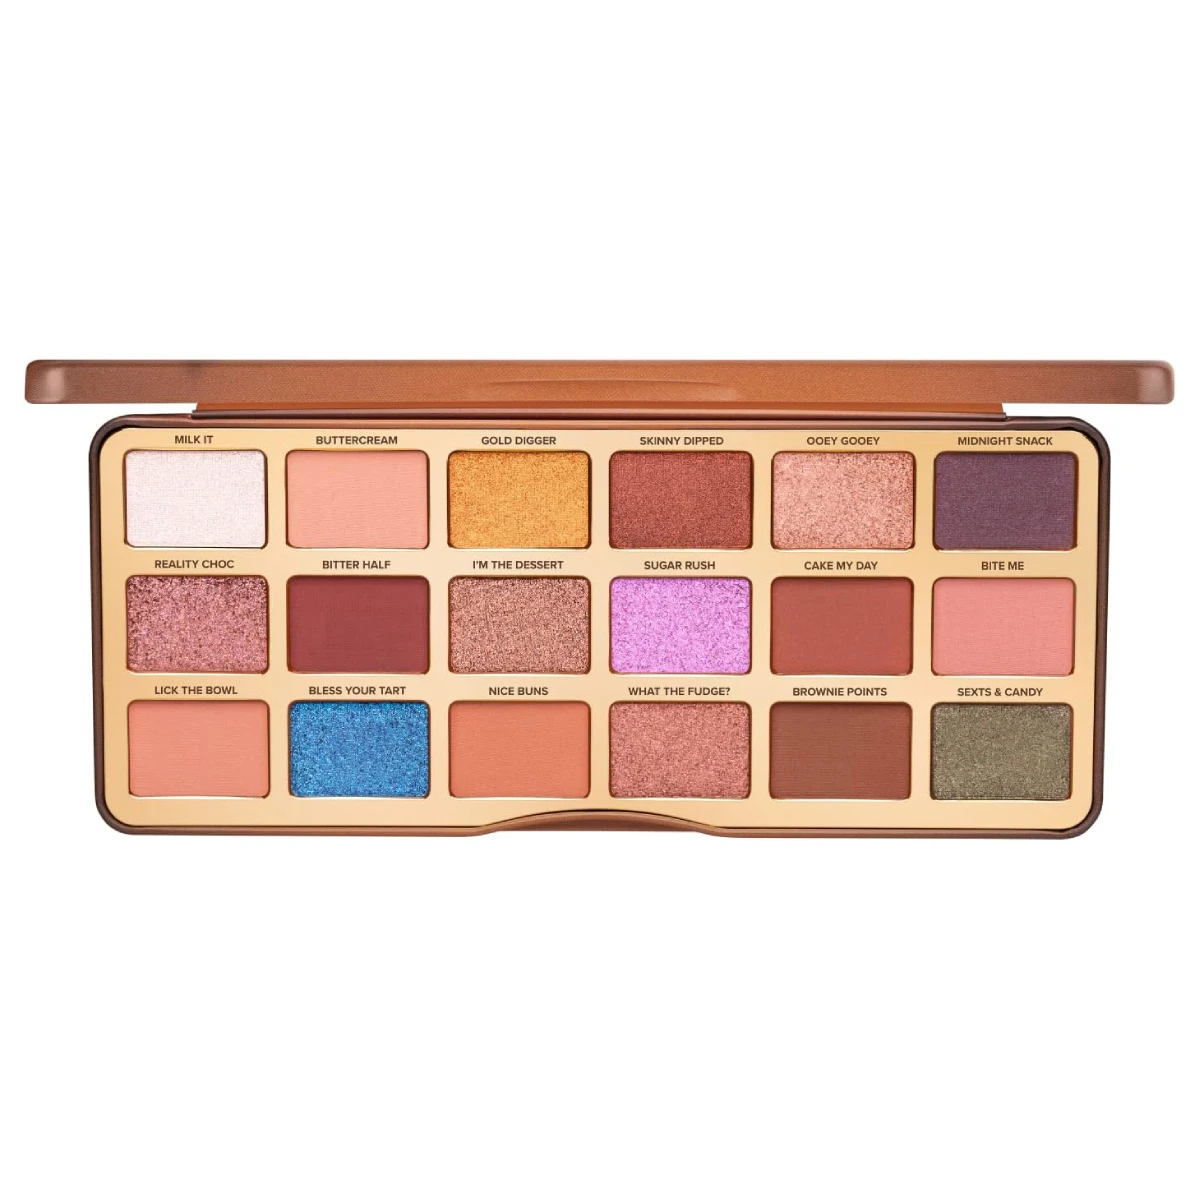 Too Faced Better Than Chocolate Eye Shadow Palette - A stunning eyeshadow palette against a white background.